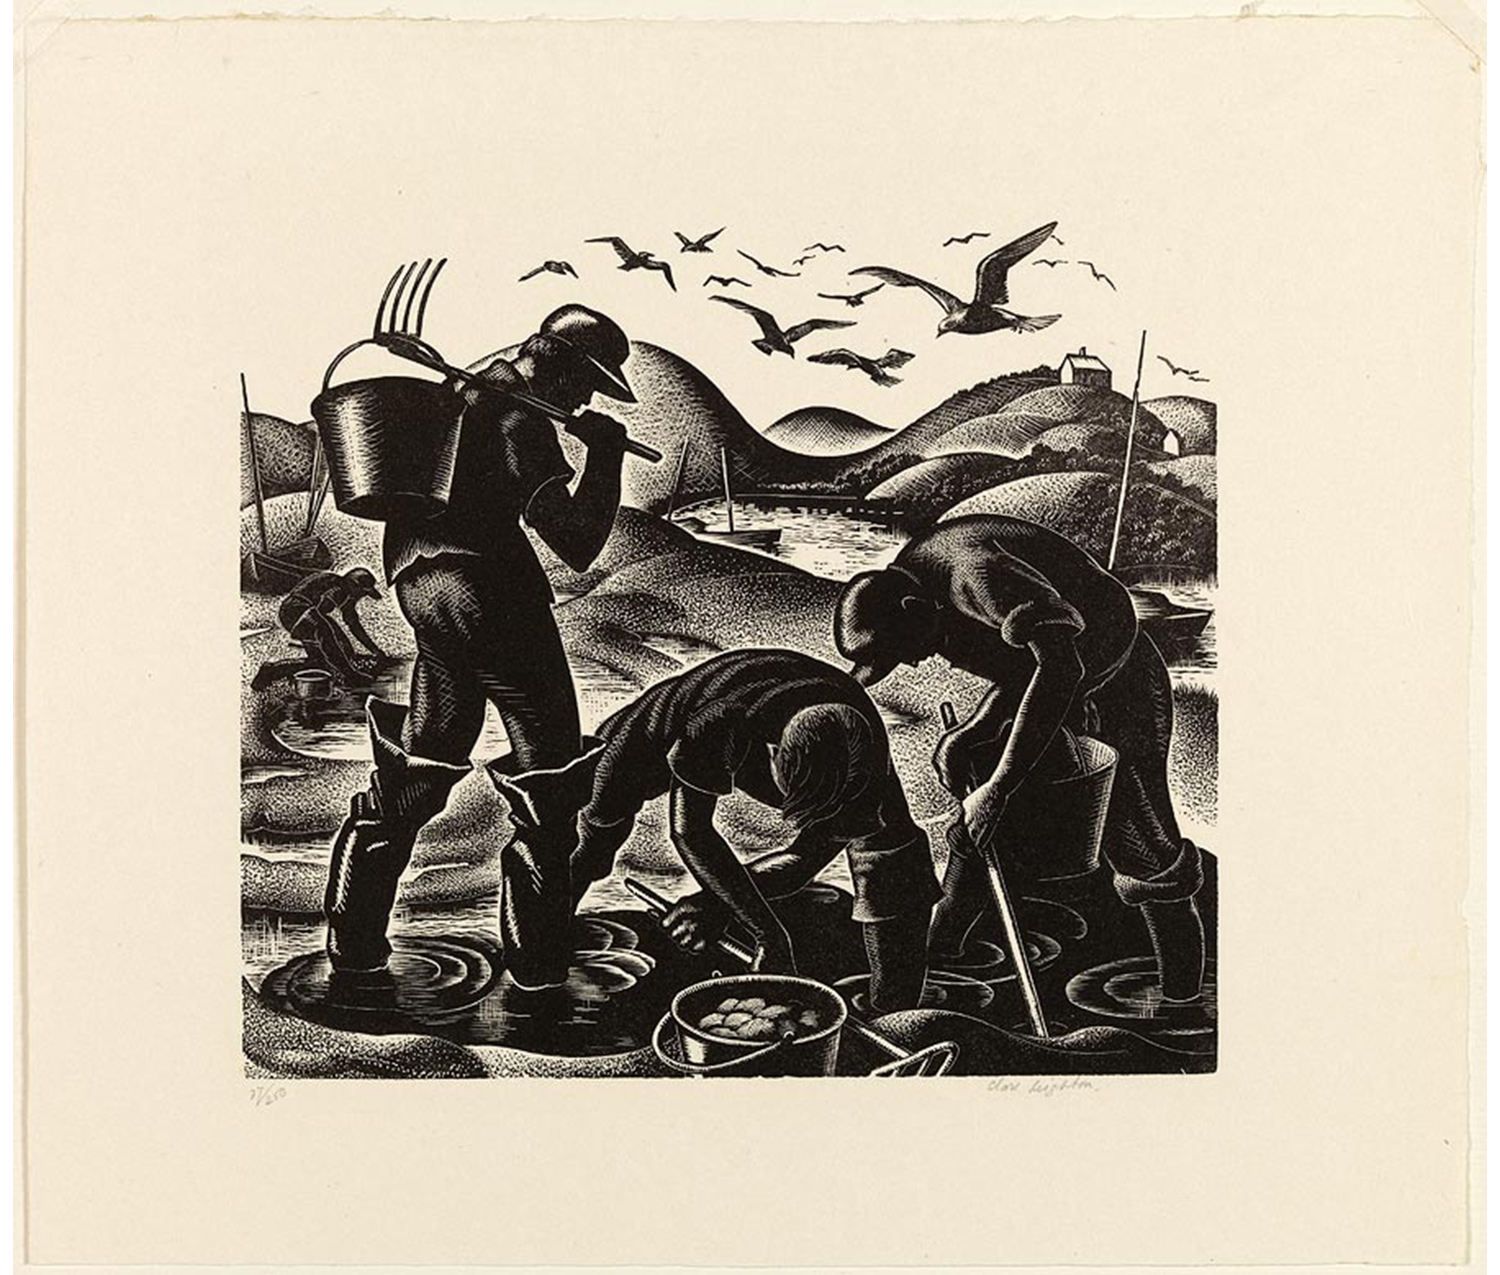 three men in tall boots standing shallow water with low hills and flying seagulls in background, left figure has a bucket attached to a rake over his shoulder, center figure is bend over pulling his rake with bucket of clams near him, third figure is bent pulling his rake with his bucket between his legs